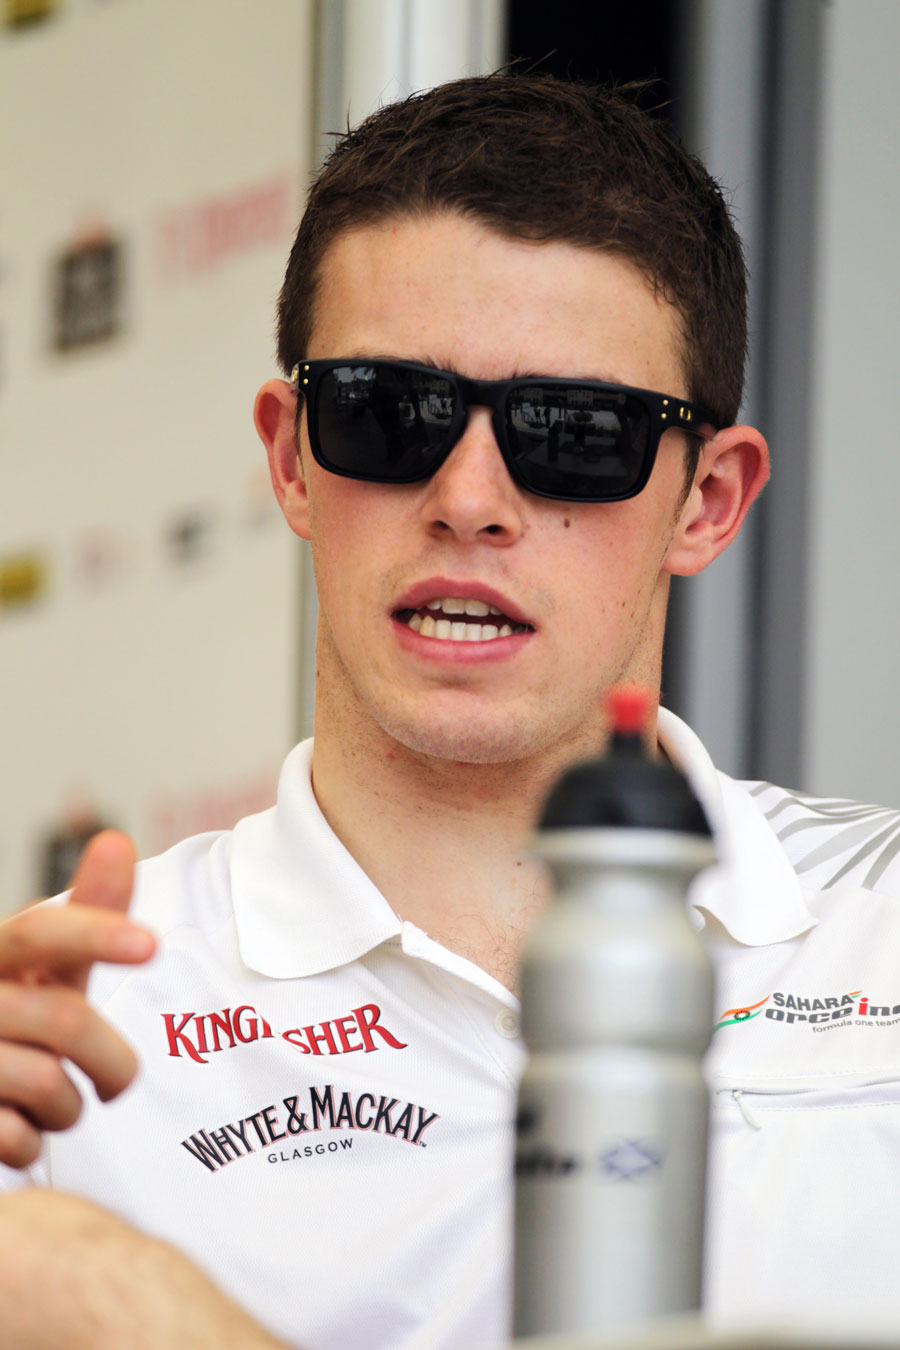 Paul di Resta in the paddock on Thursday